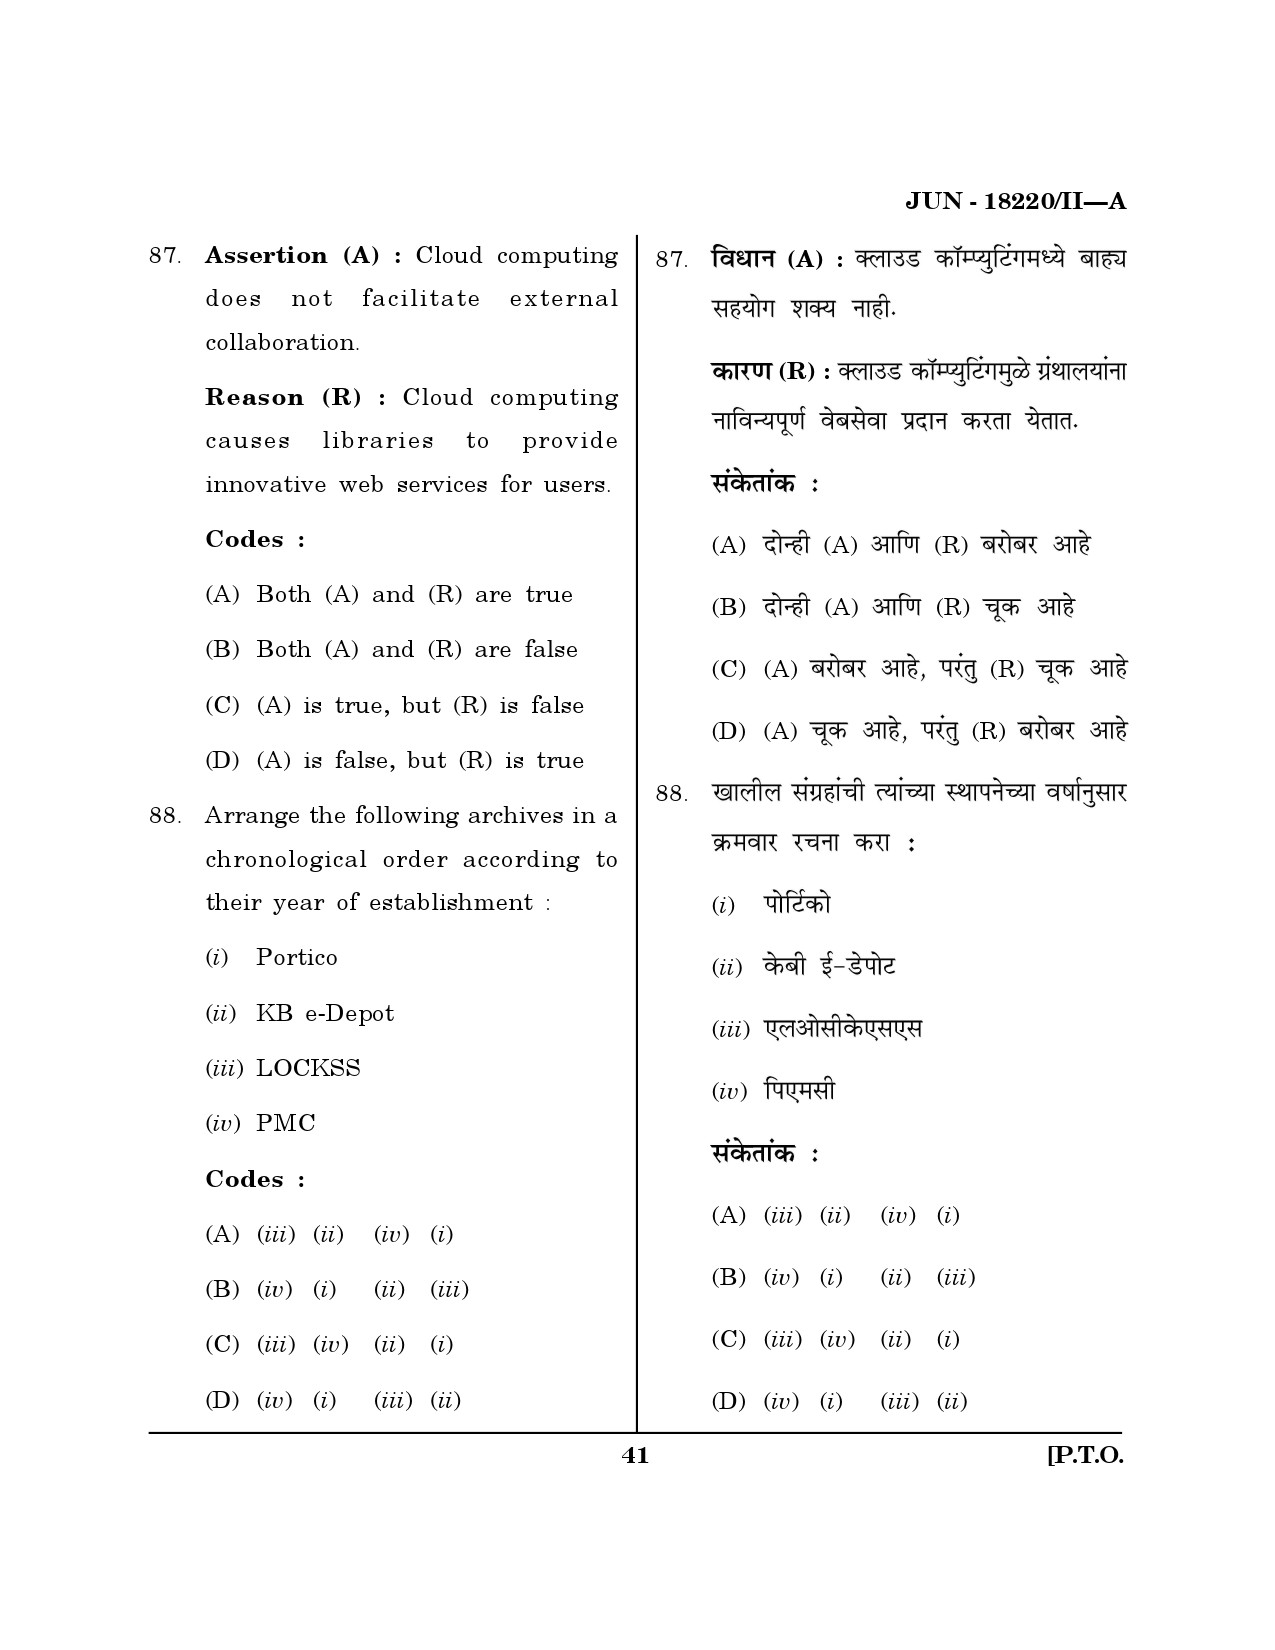 Maharashtra SET Library Information Science Question Paper II June 2020 40